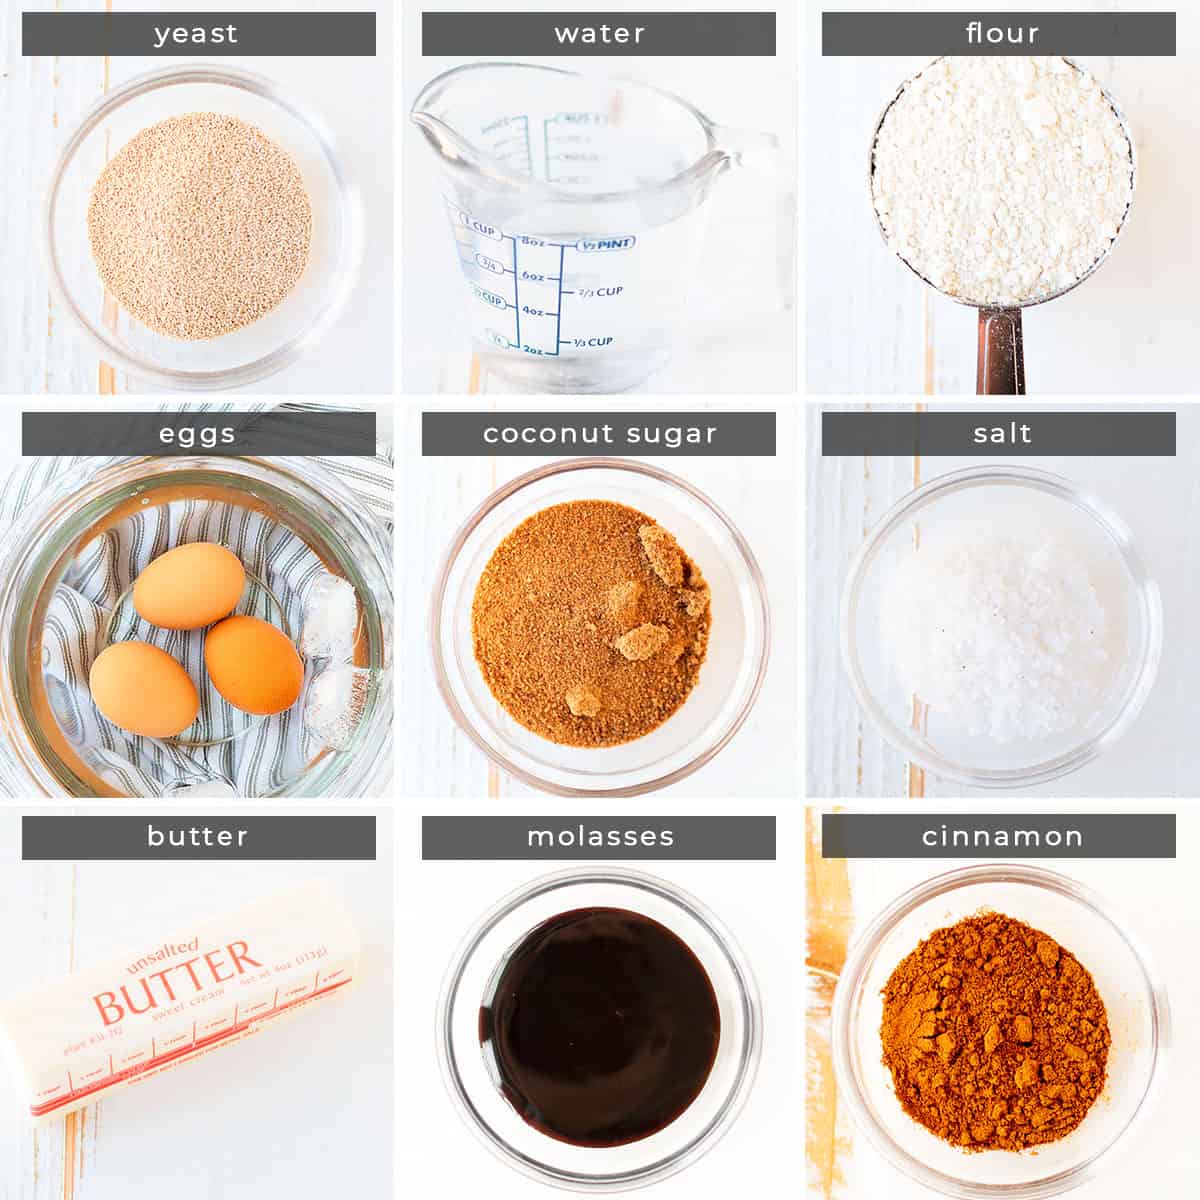 Image containing recipe ingredients yeast, water, flour, eggs, coconut sugar, salt, butter, molasses, and cinnamon.